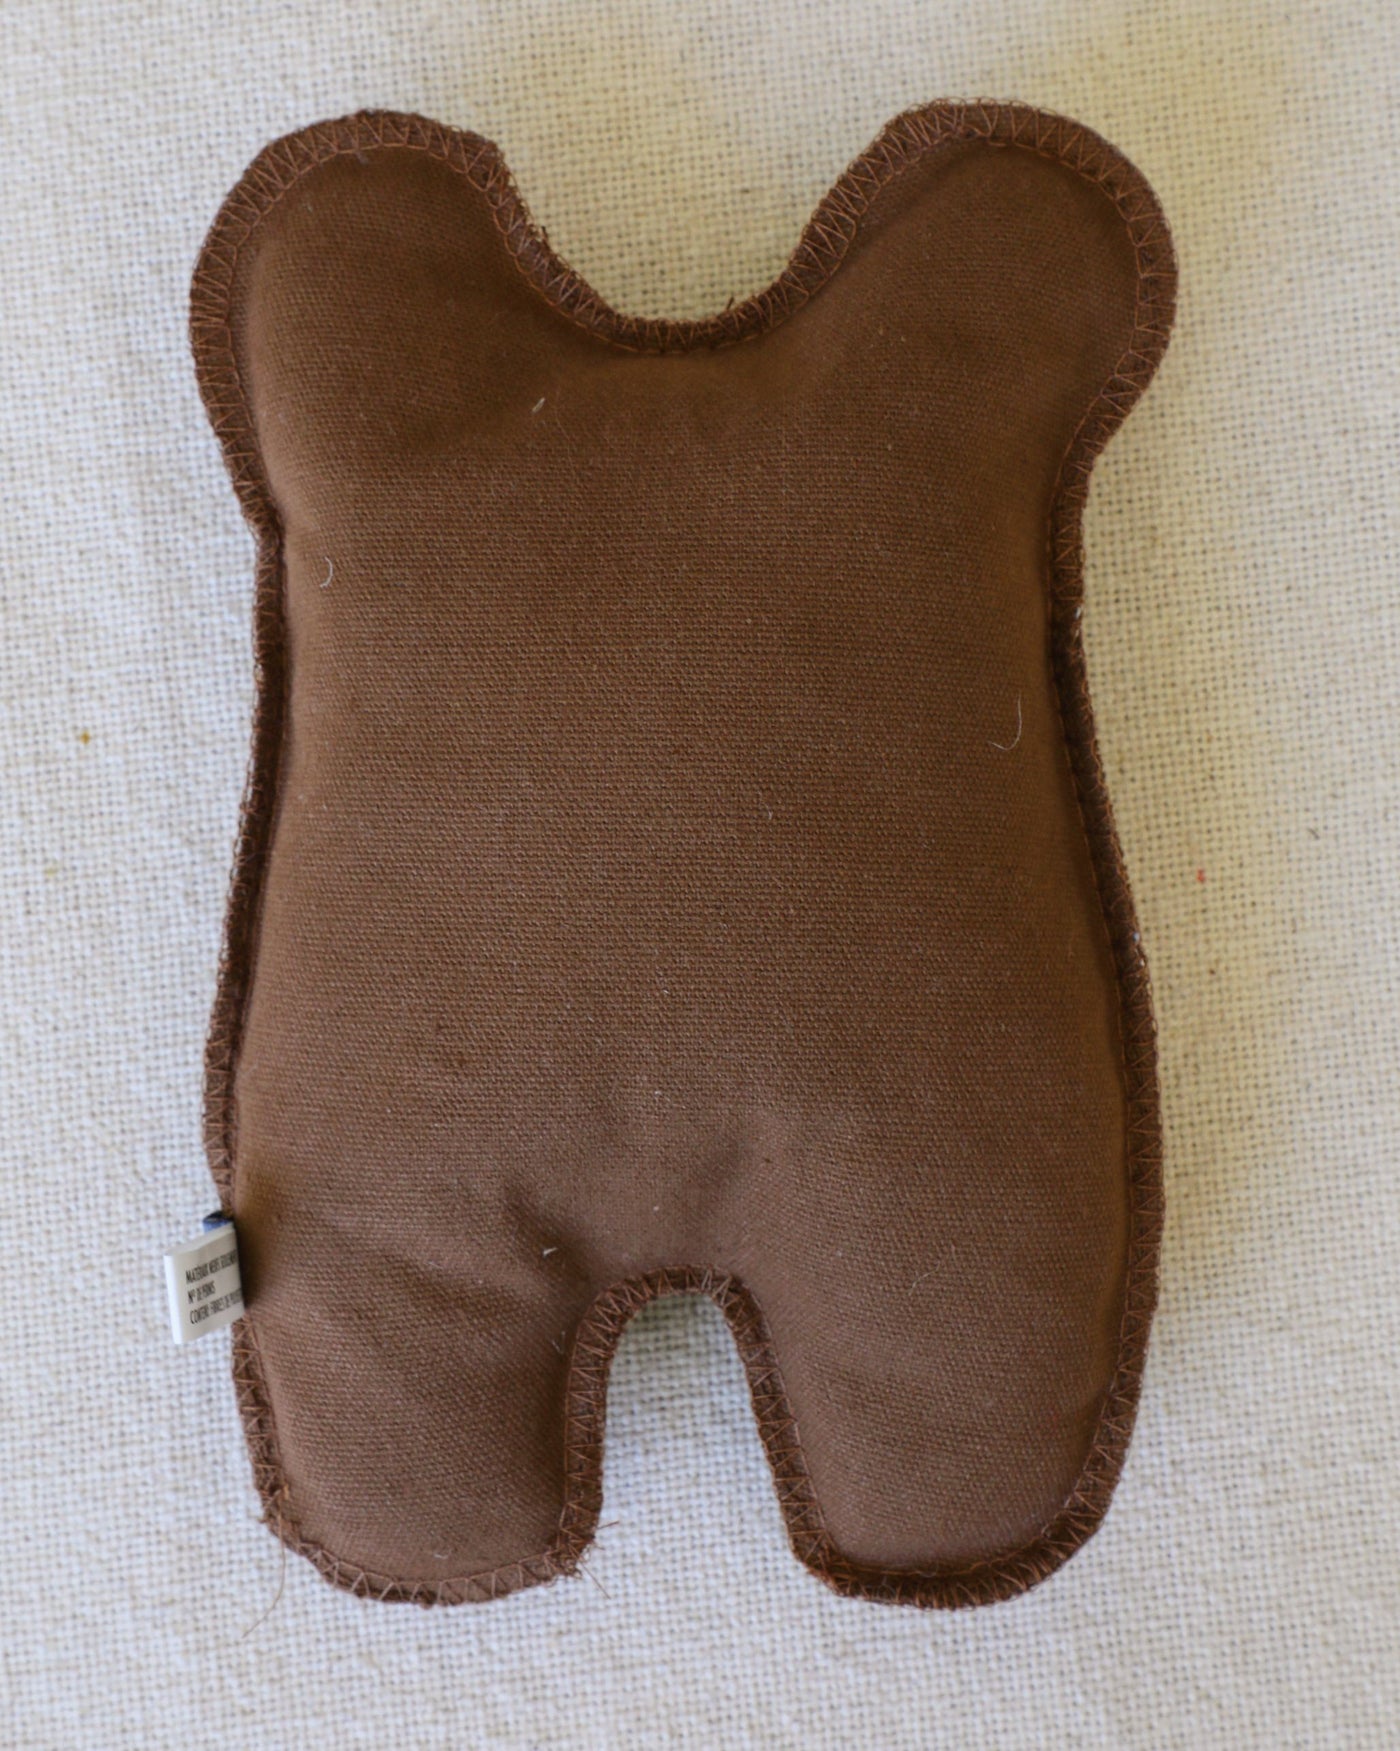 Bear With Me Canvas Squeaker Toy Product Image Detail